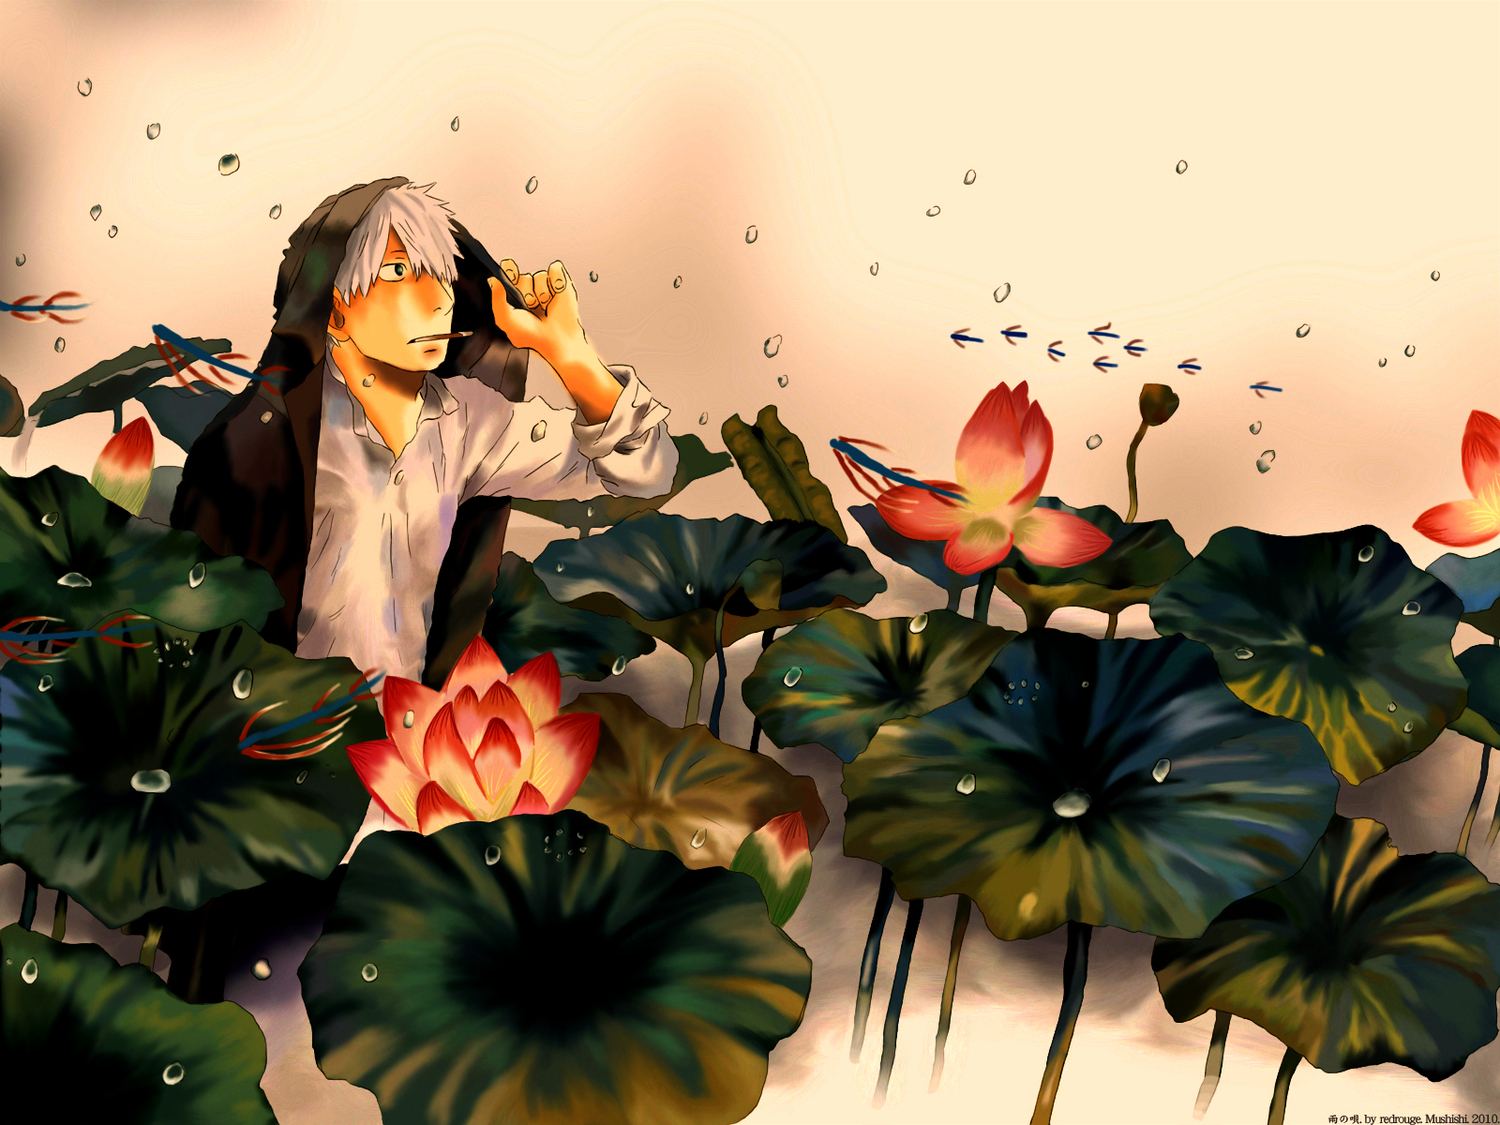 Ginko, the protagonist from Mushishi, explores a beautiful Lotus Garden in this anime-inspired desktop wallpaper.